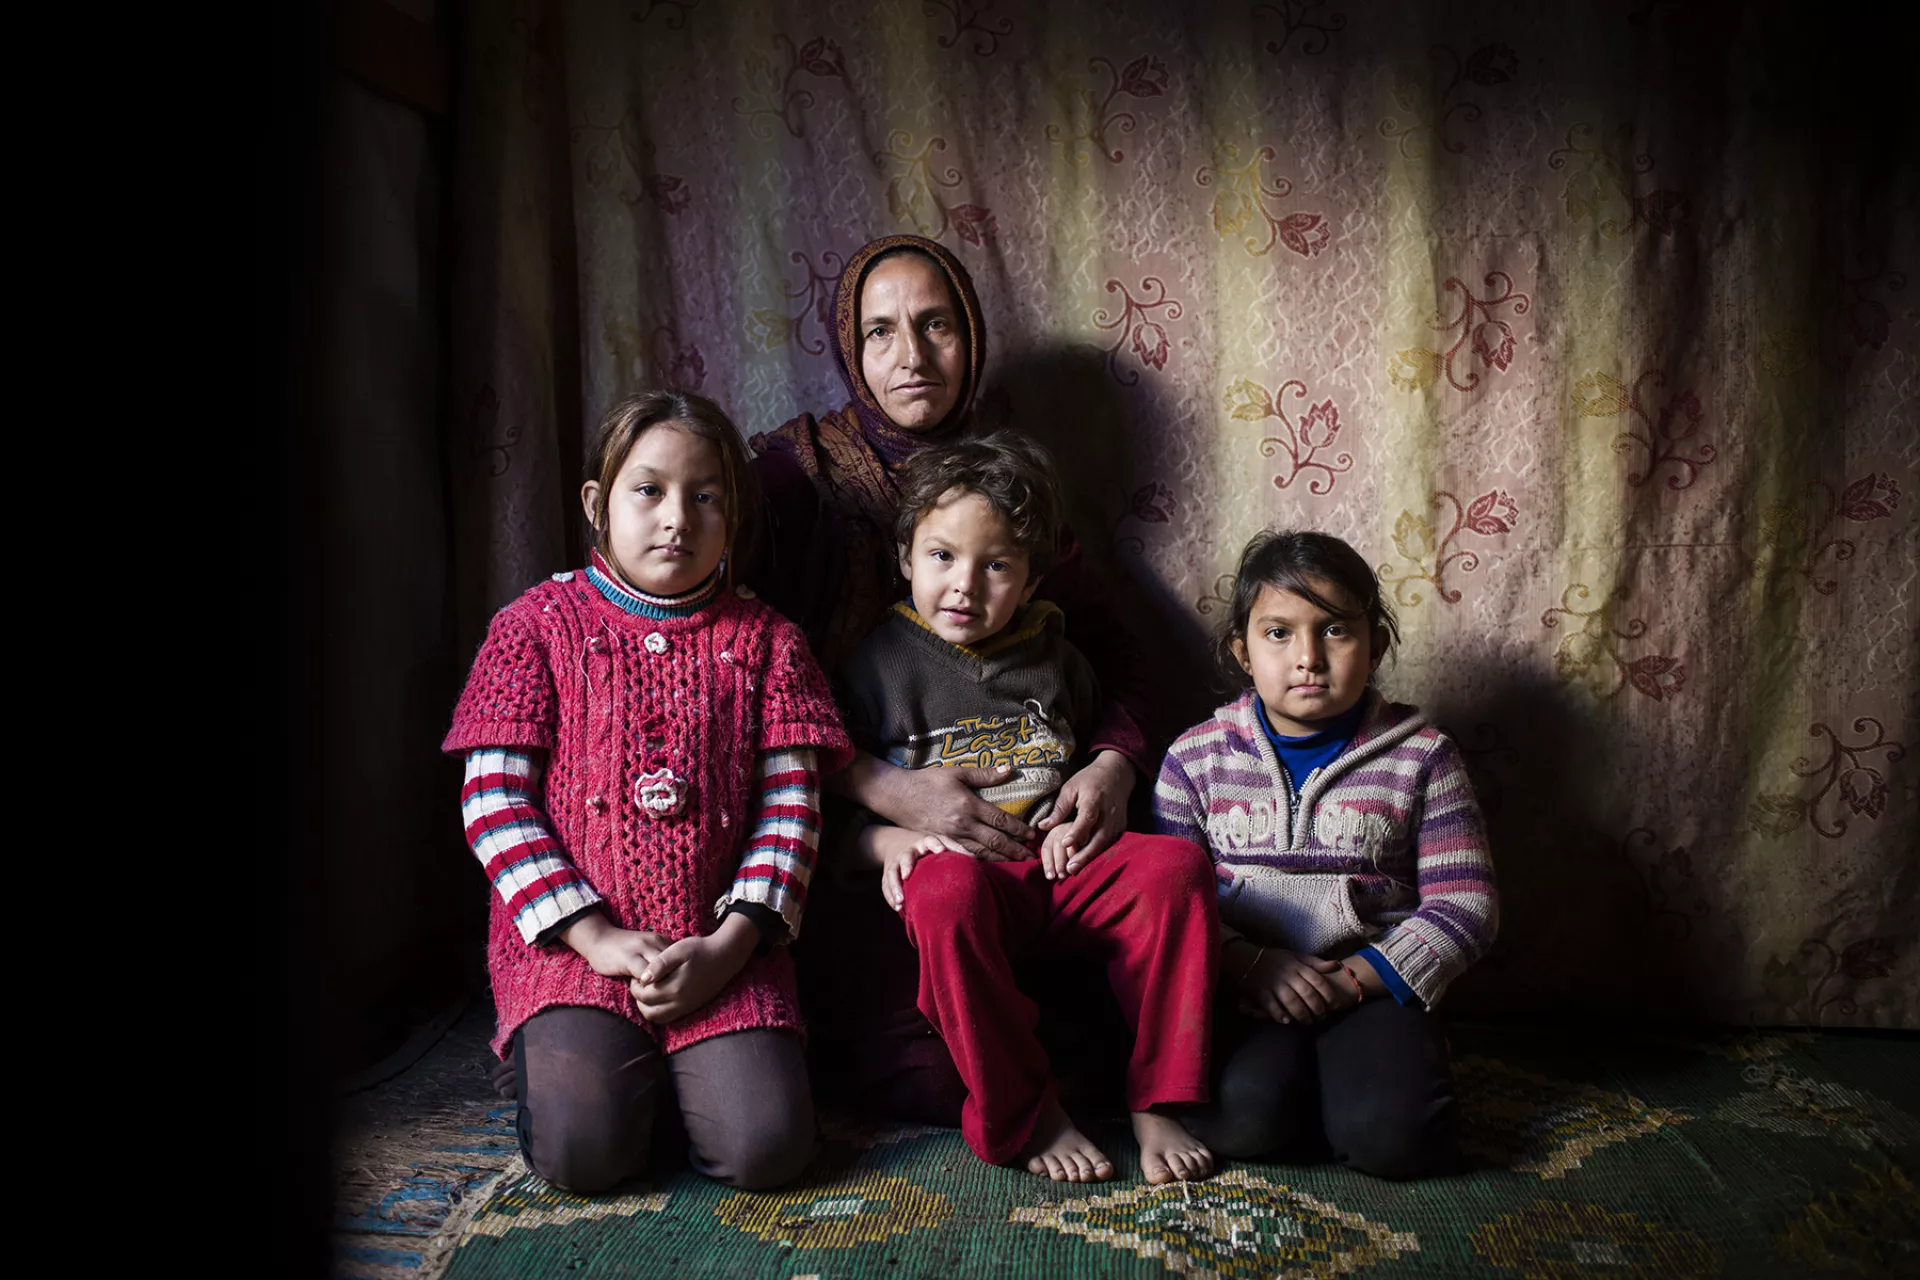 A woman sits with three children, Lebanon